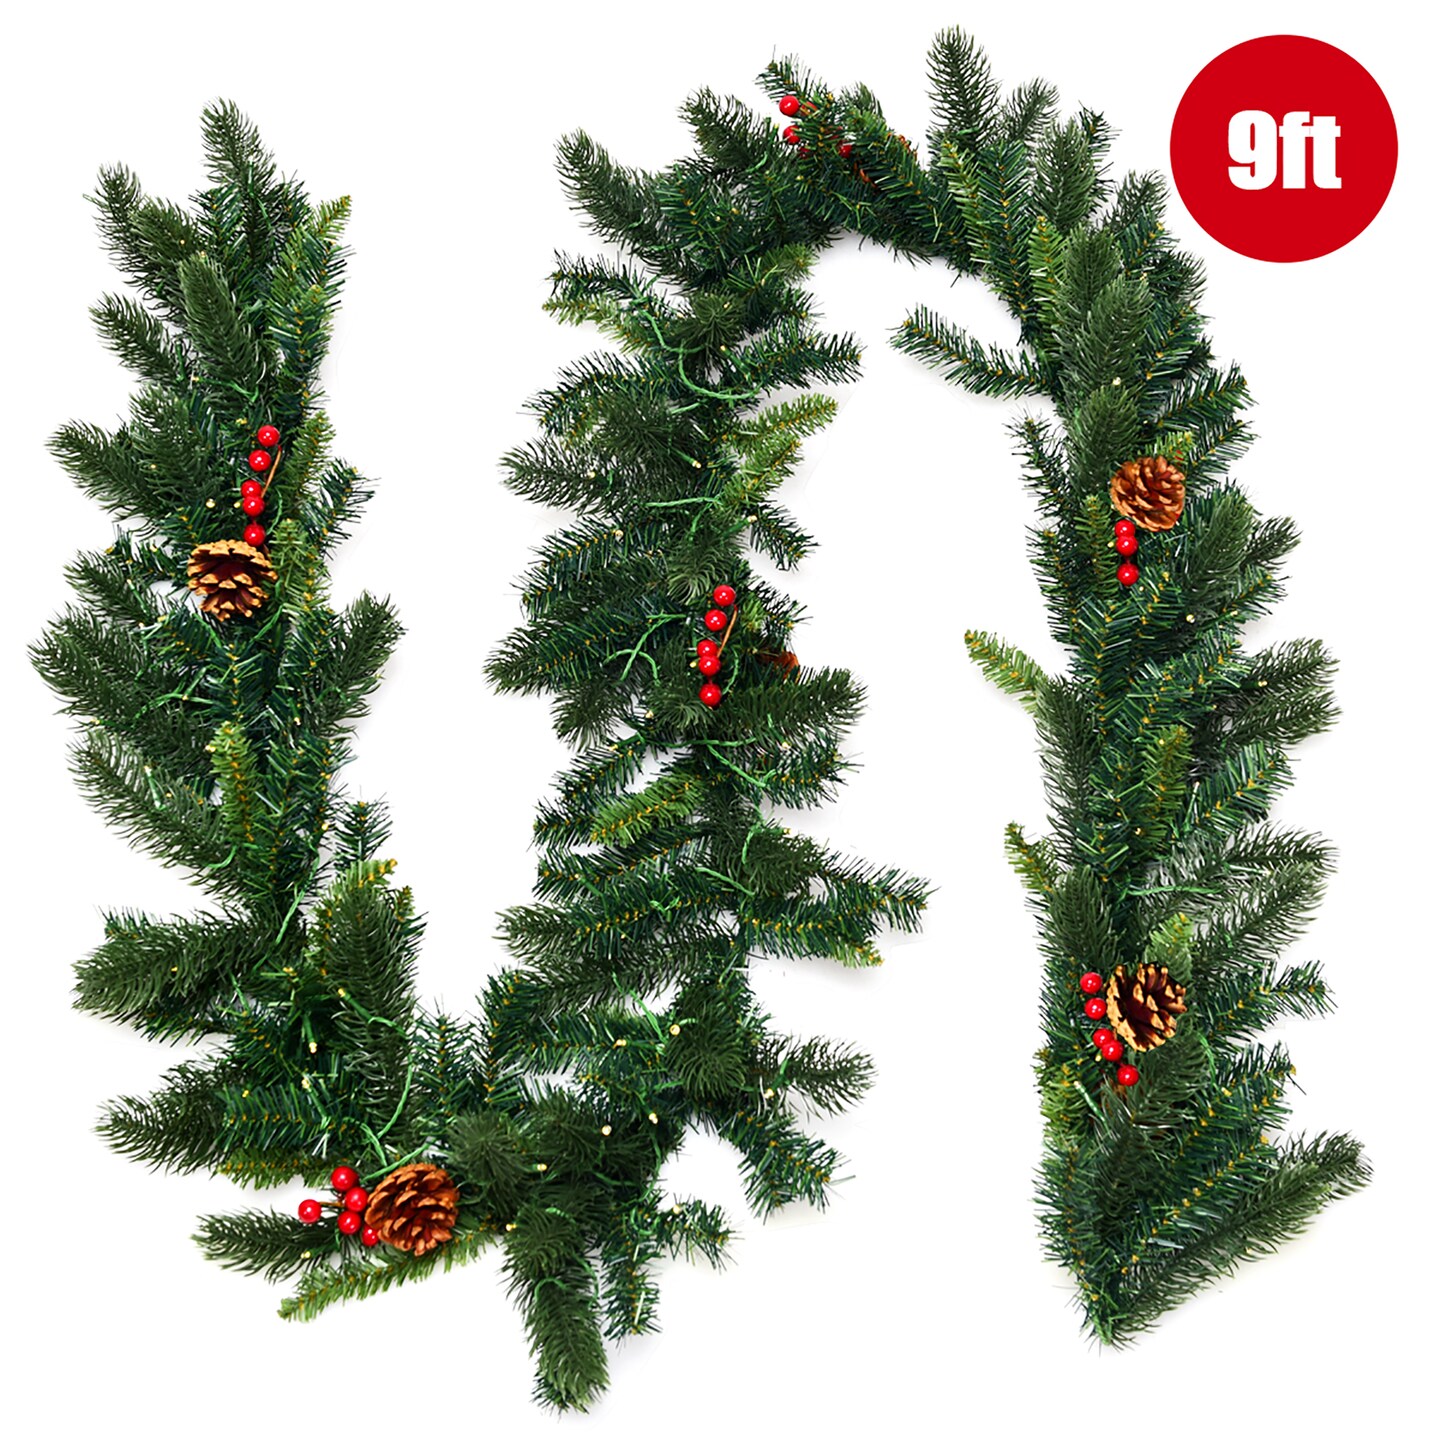 9' x 10 Pre-lit Wispy Willow White Artificial Christmas Garland with 50  Clear Lights